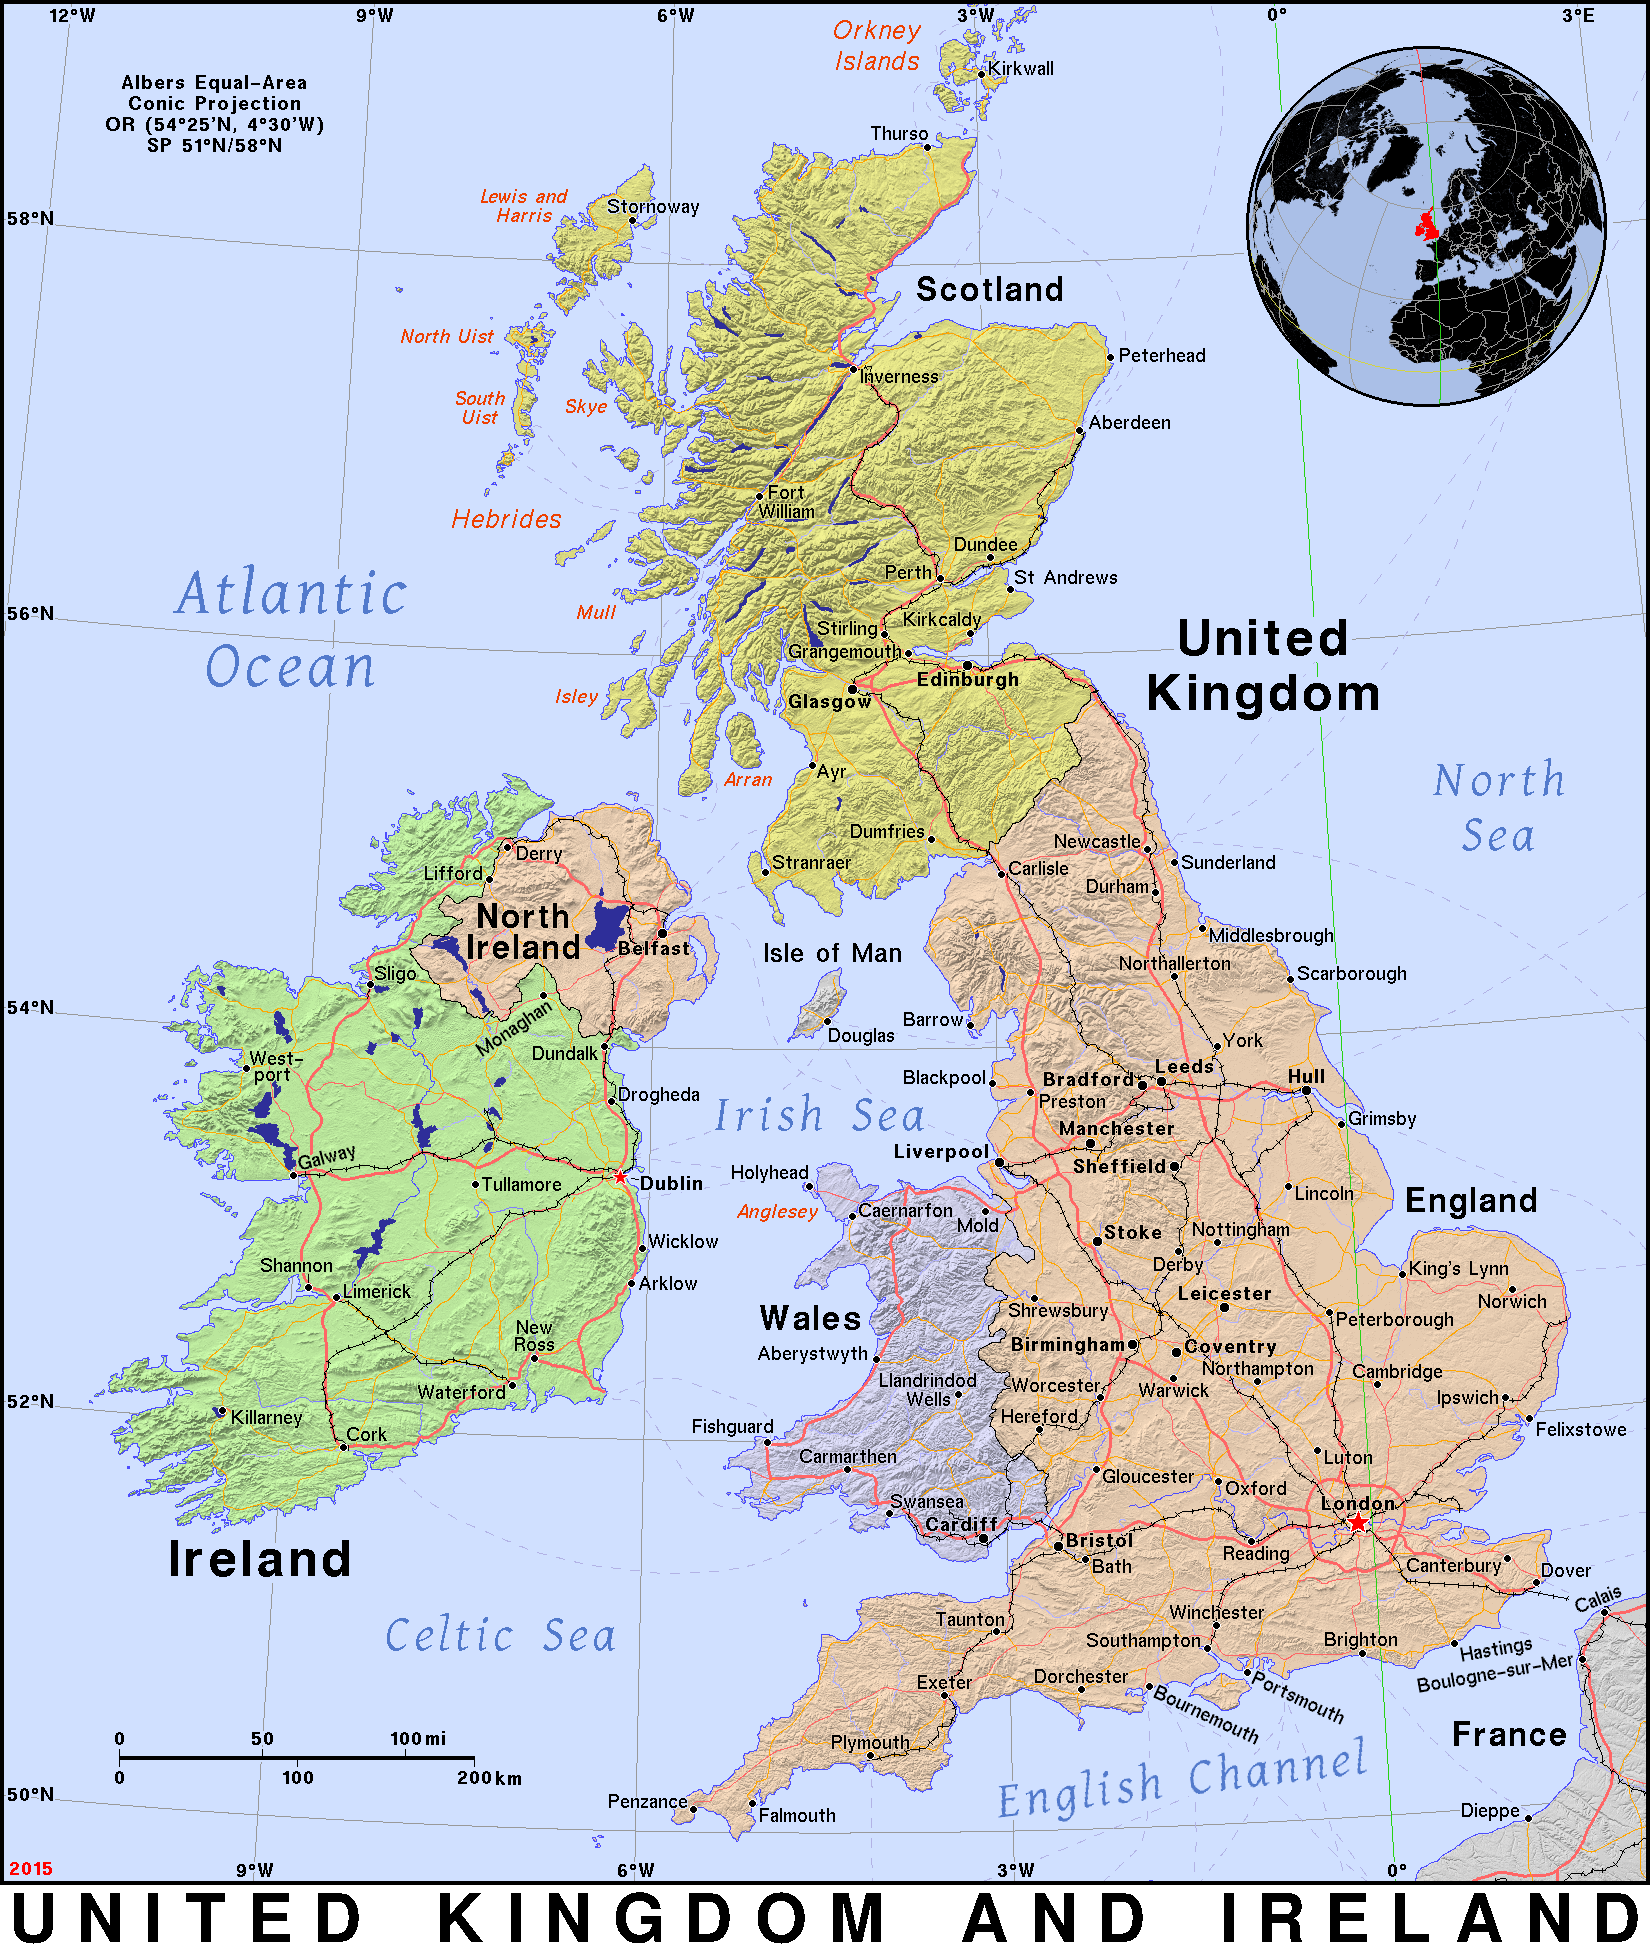 United Kingdom And Ireland Public Domain Maps By Pat The Free